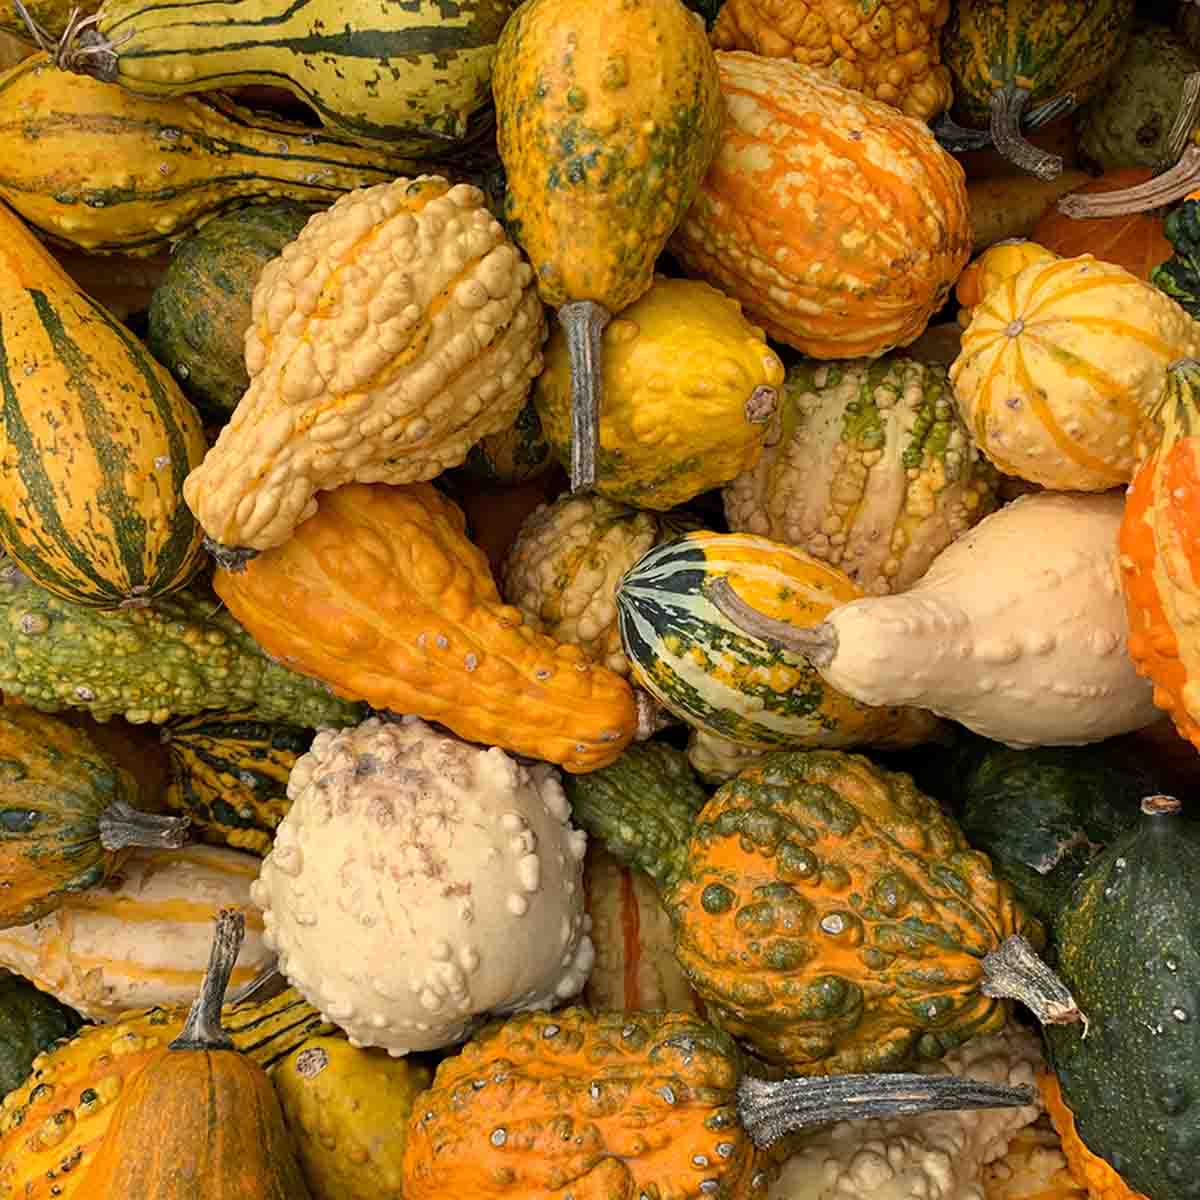 A crate full of gourds